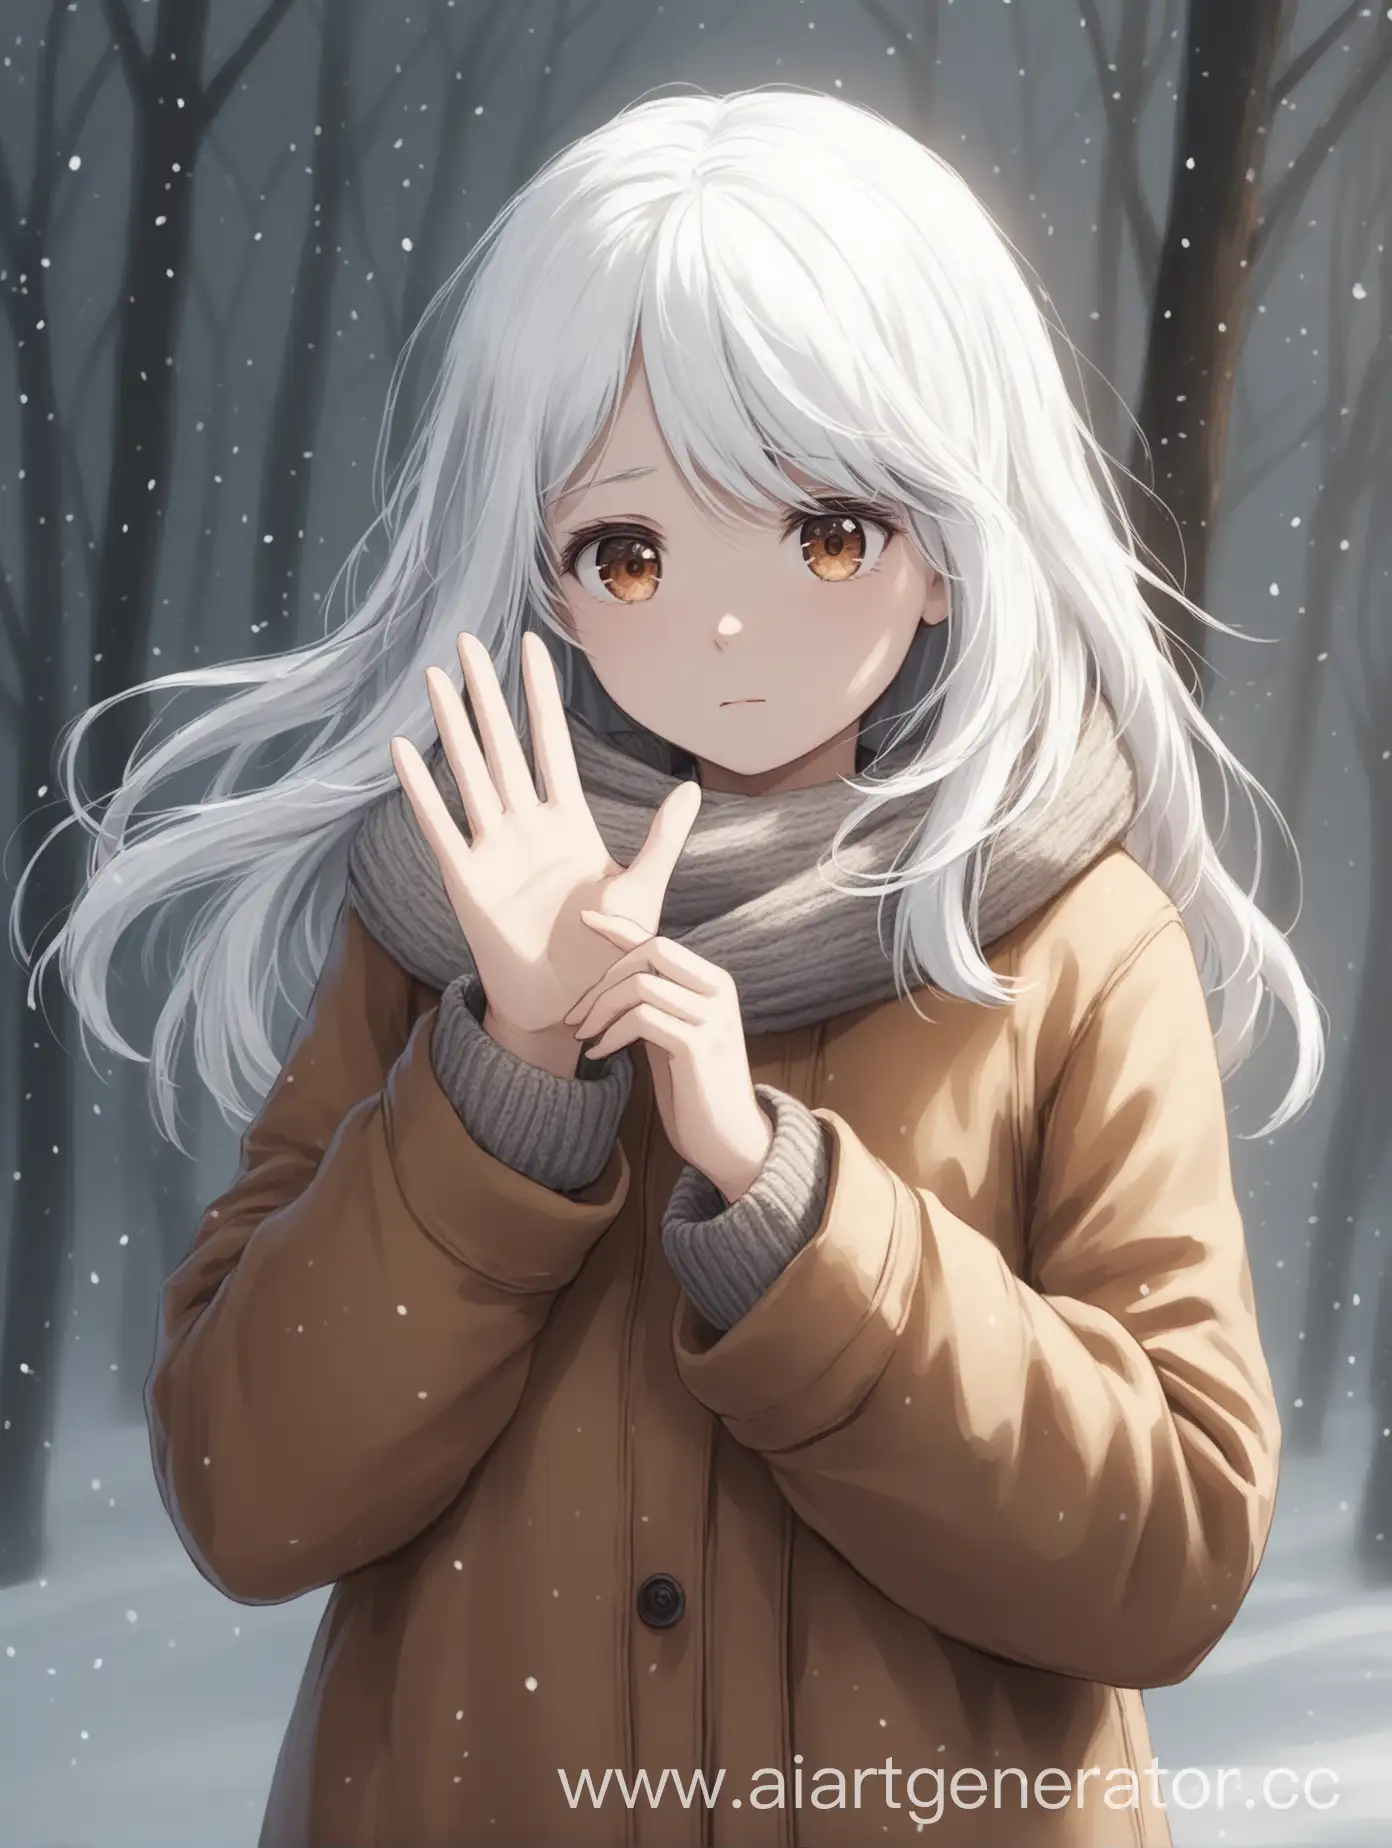 A girl with white hair and warm clothes waves her hand very shyly but 